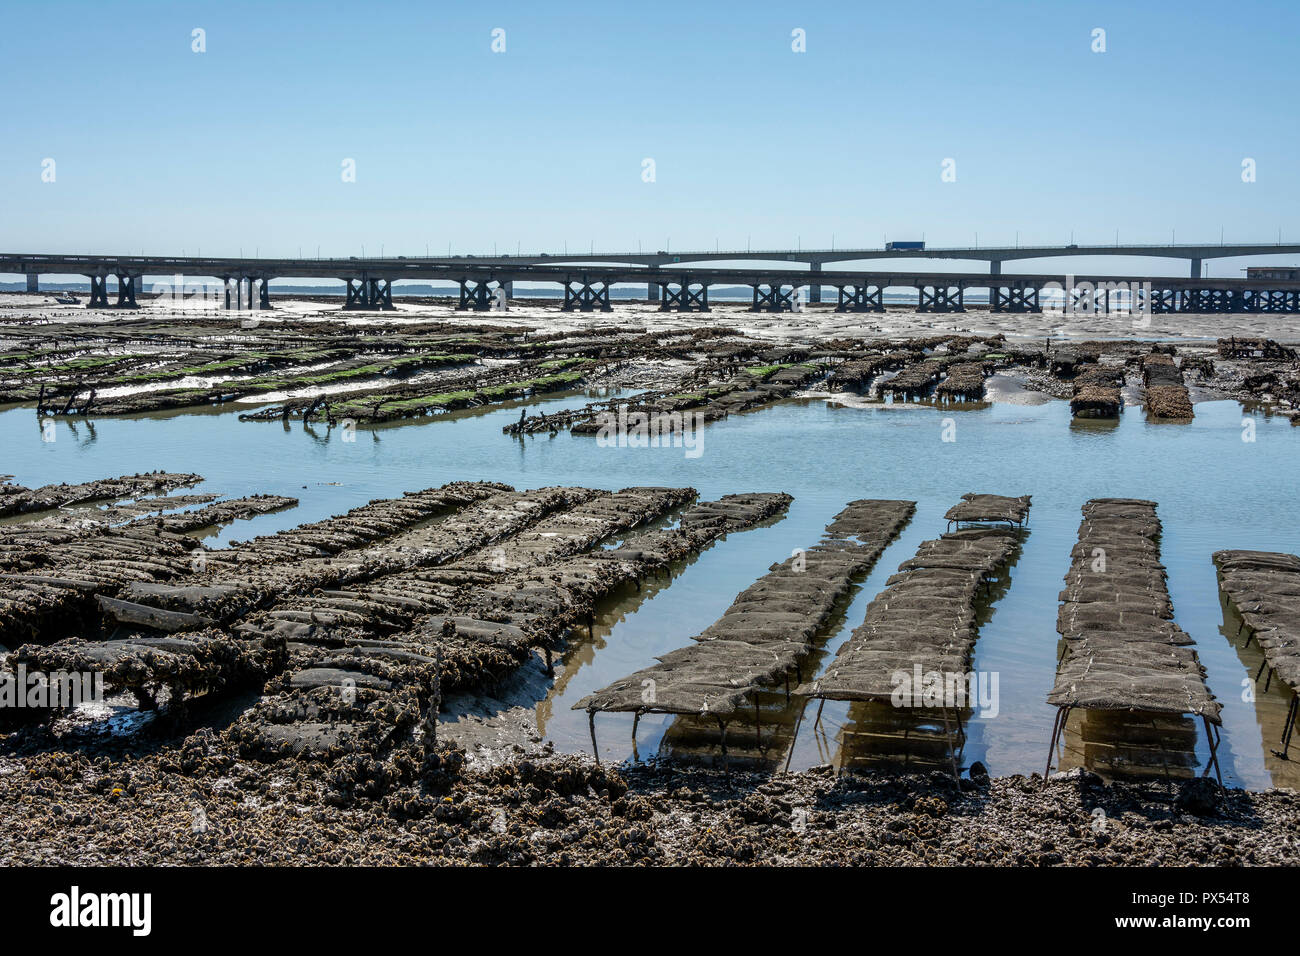 Oyster beds and Oleron bridge, Charente Maritime, Nouvelle-Aquitaine, France Stock Photo